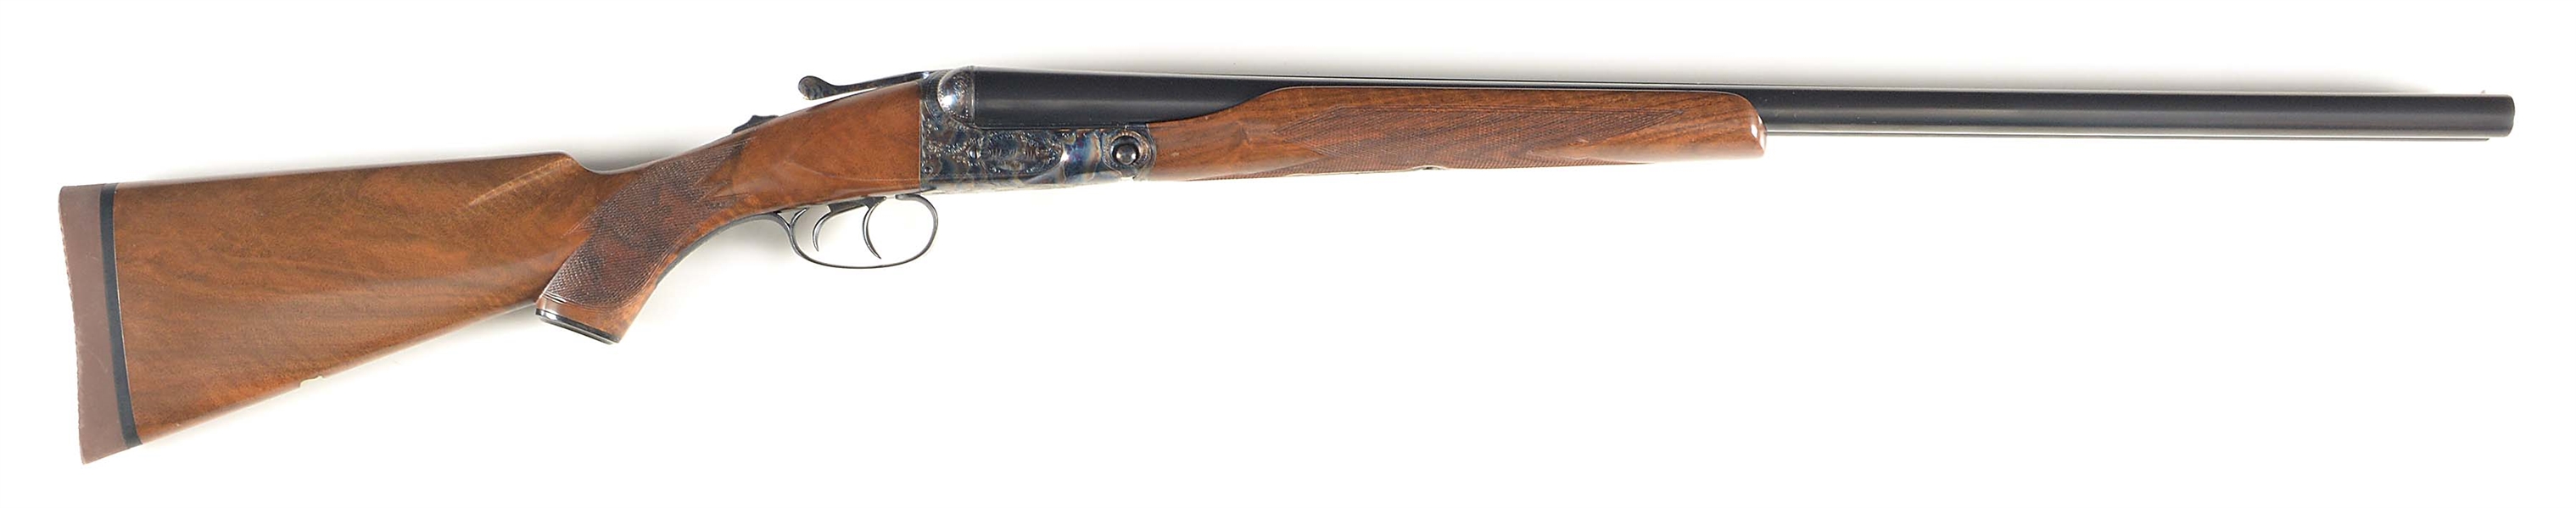 (C) PARKER BROTHERS GHE GRADE 12 BORE SIDE BY SIDE SHOTGUN WITH DEL GREGO PROVENANCE.